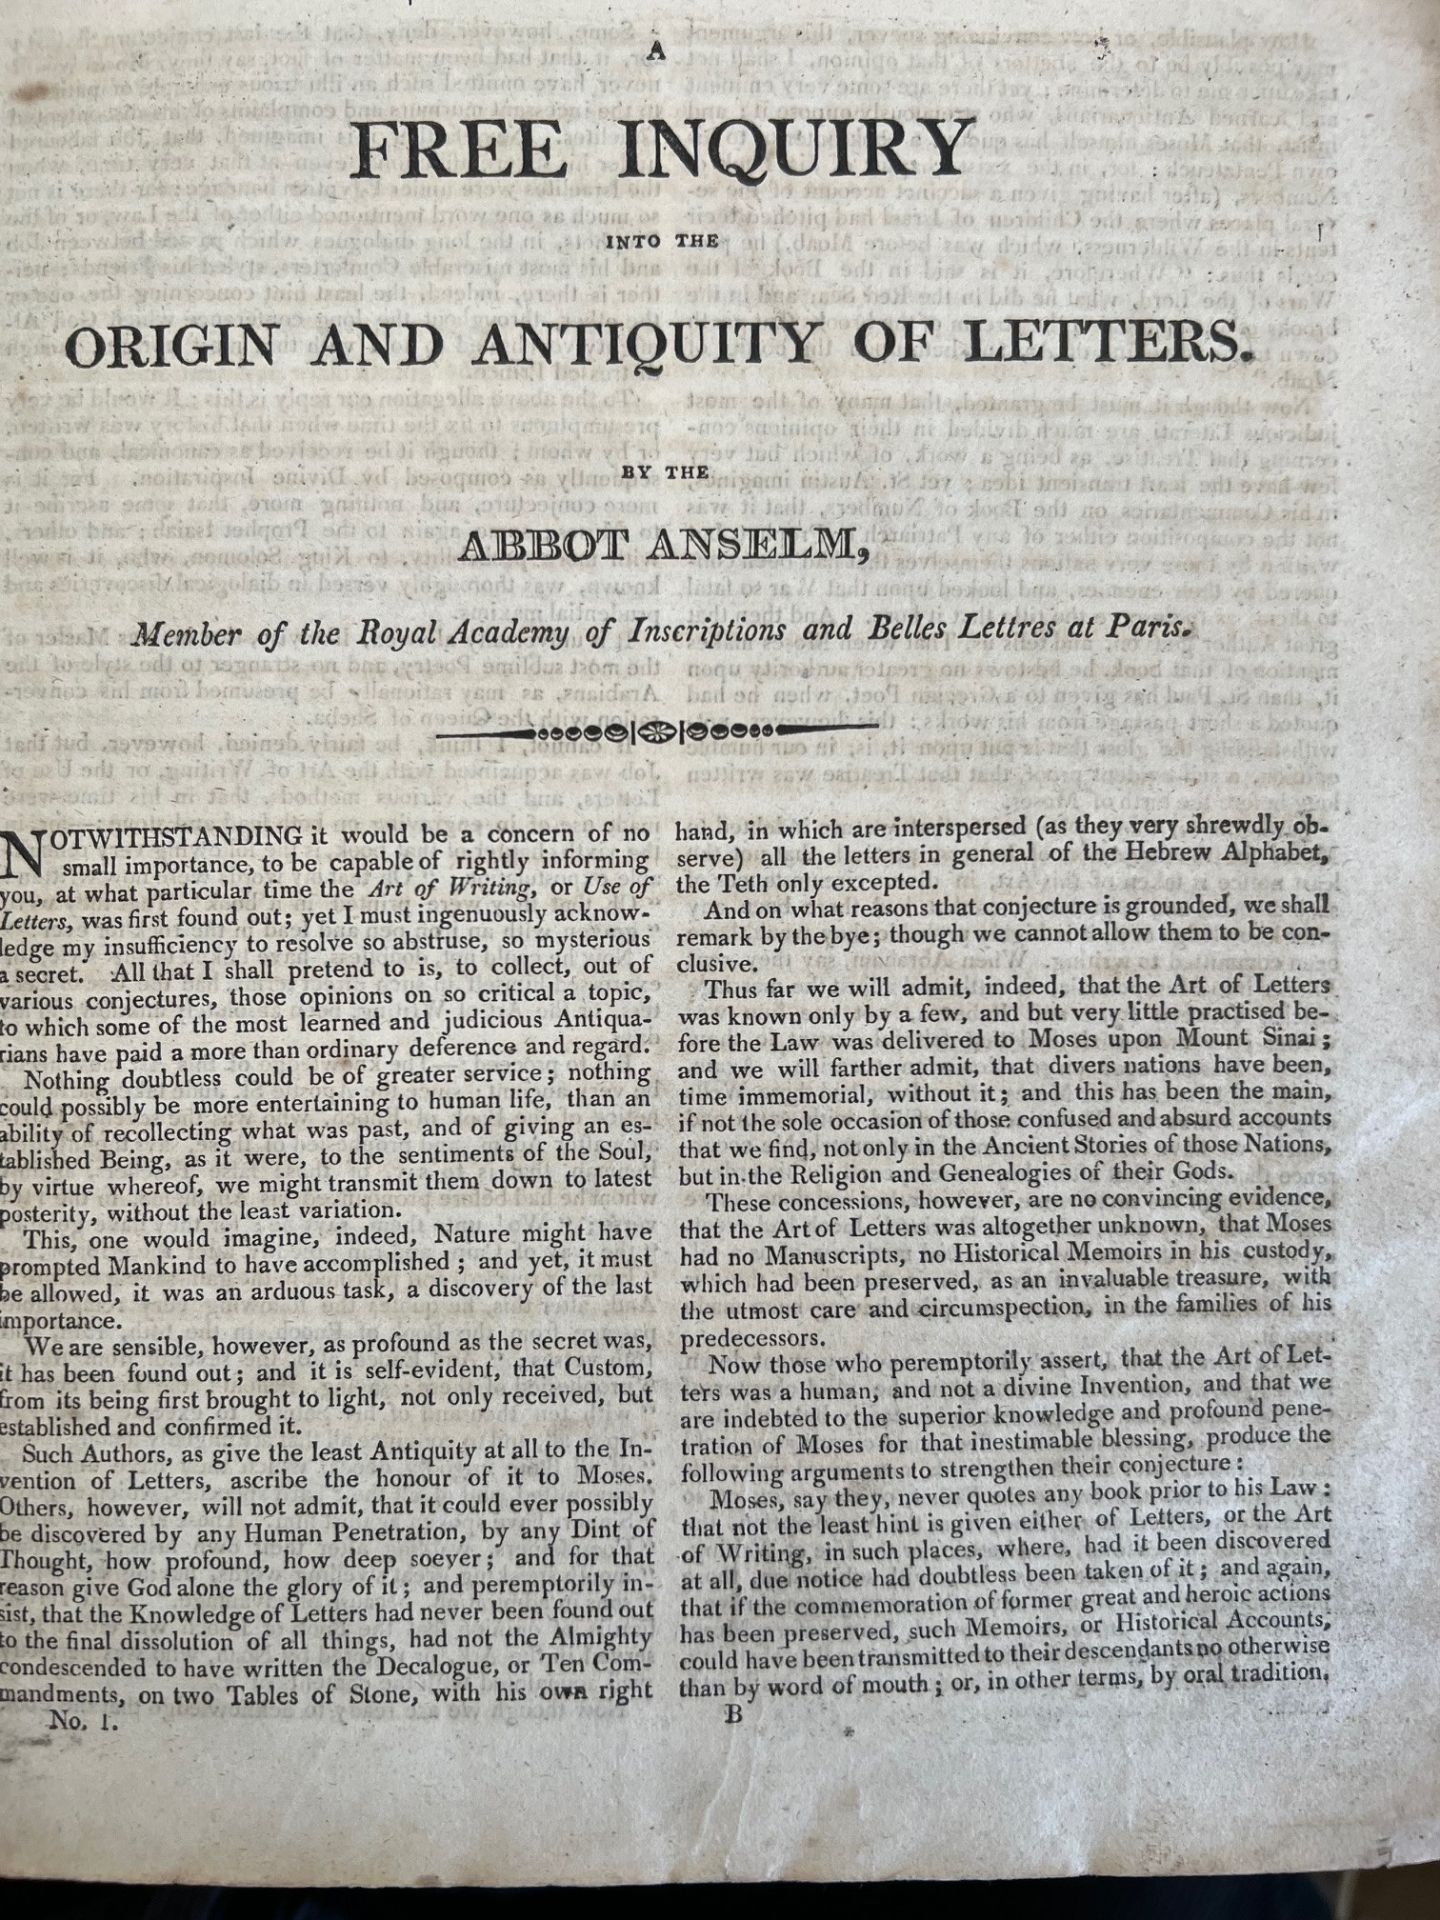 ABBOT ANSELM 'ORIGIN AND ANTIQUITY OF LETTERS', PENCIL INSCRIPTION, 1829 - Image 2 of 5